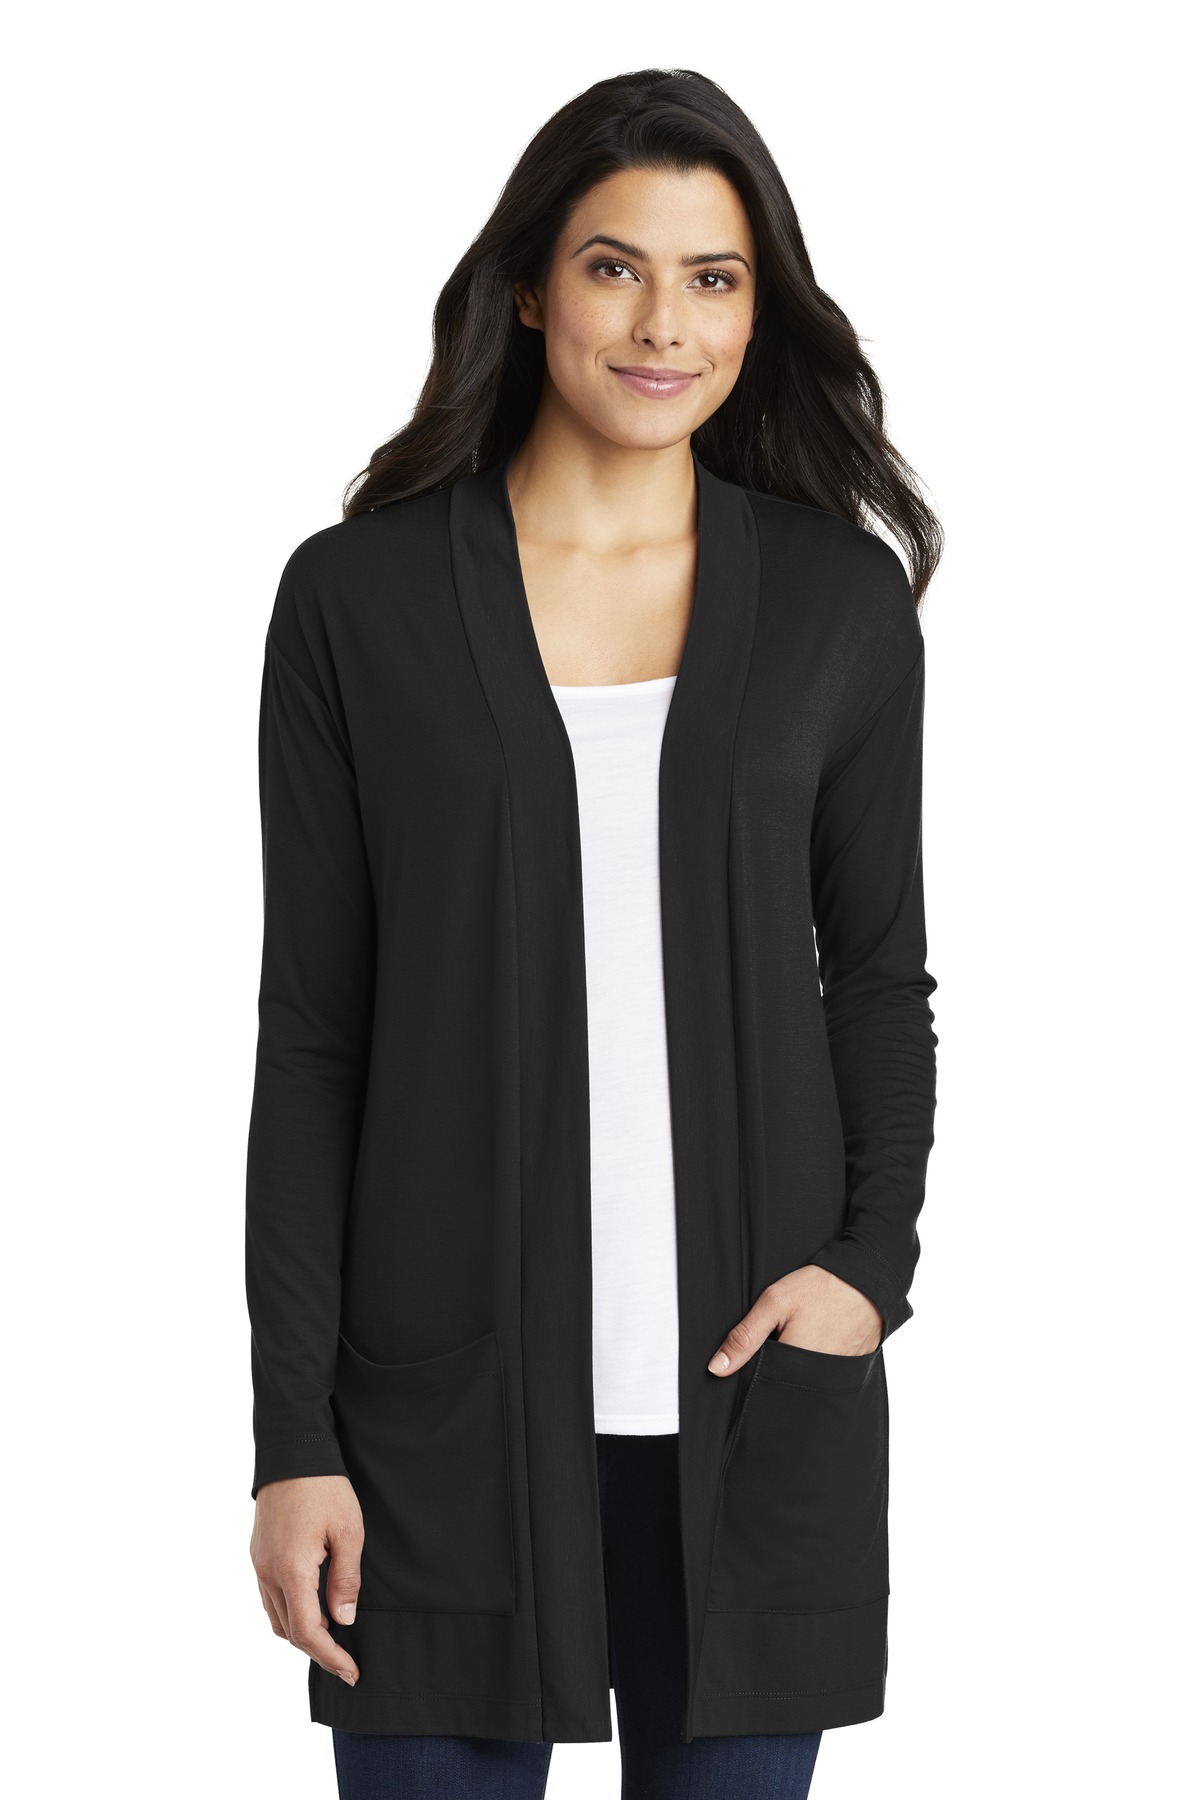 Port Authority Ladies Hospitality Polos & Knits ® Ladies Concept Long Pocket Cardigan .-Port Authority